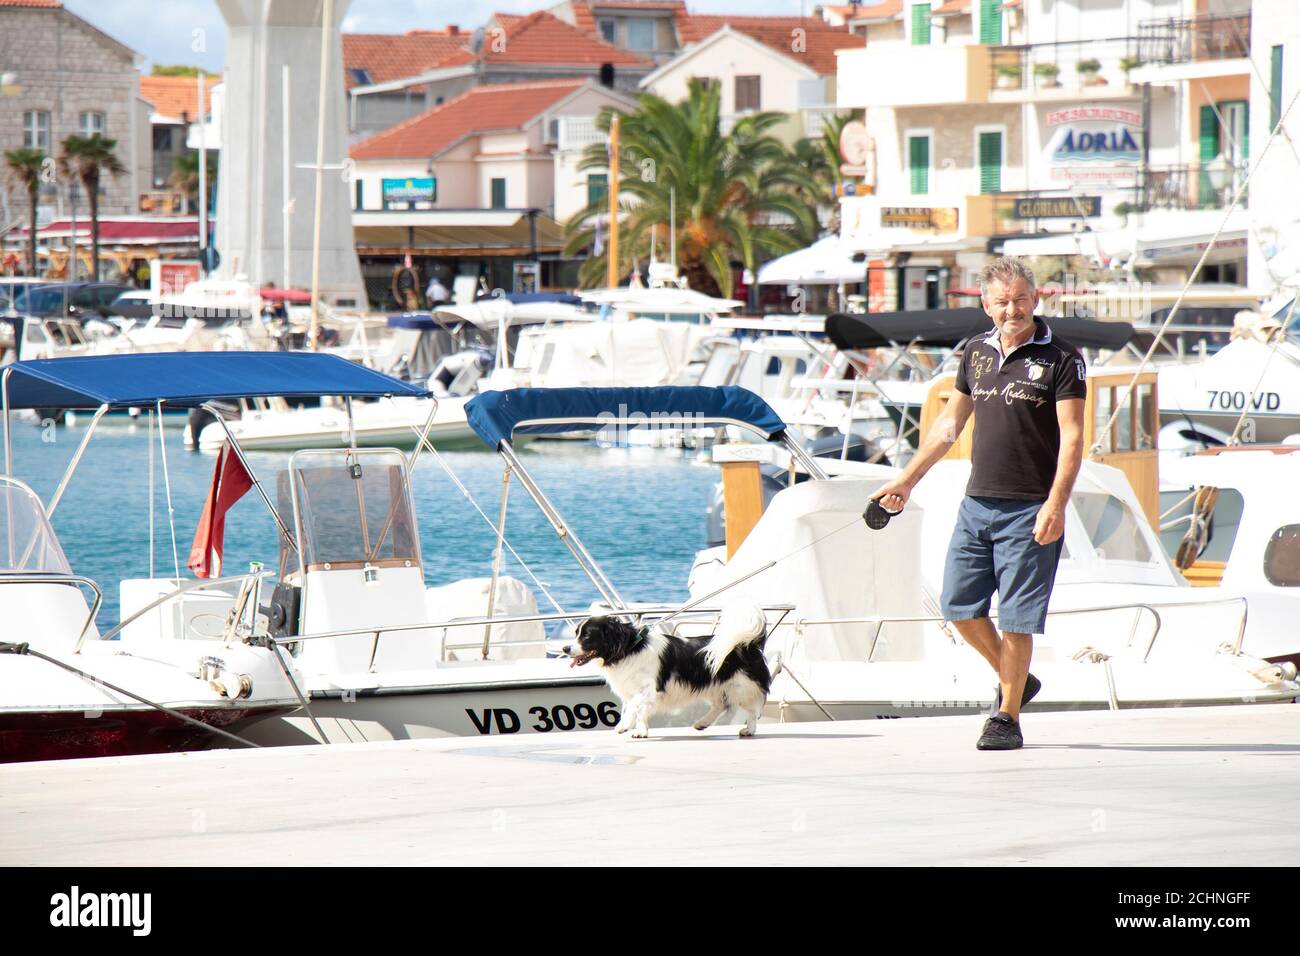 Vodice, Croatia - September 1, 2020: Man walking a dog on a leash on the picturesque  dock with boats and houses Stock Photo